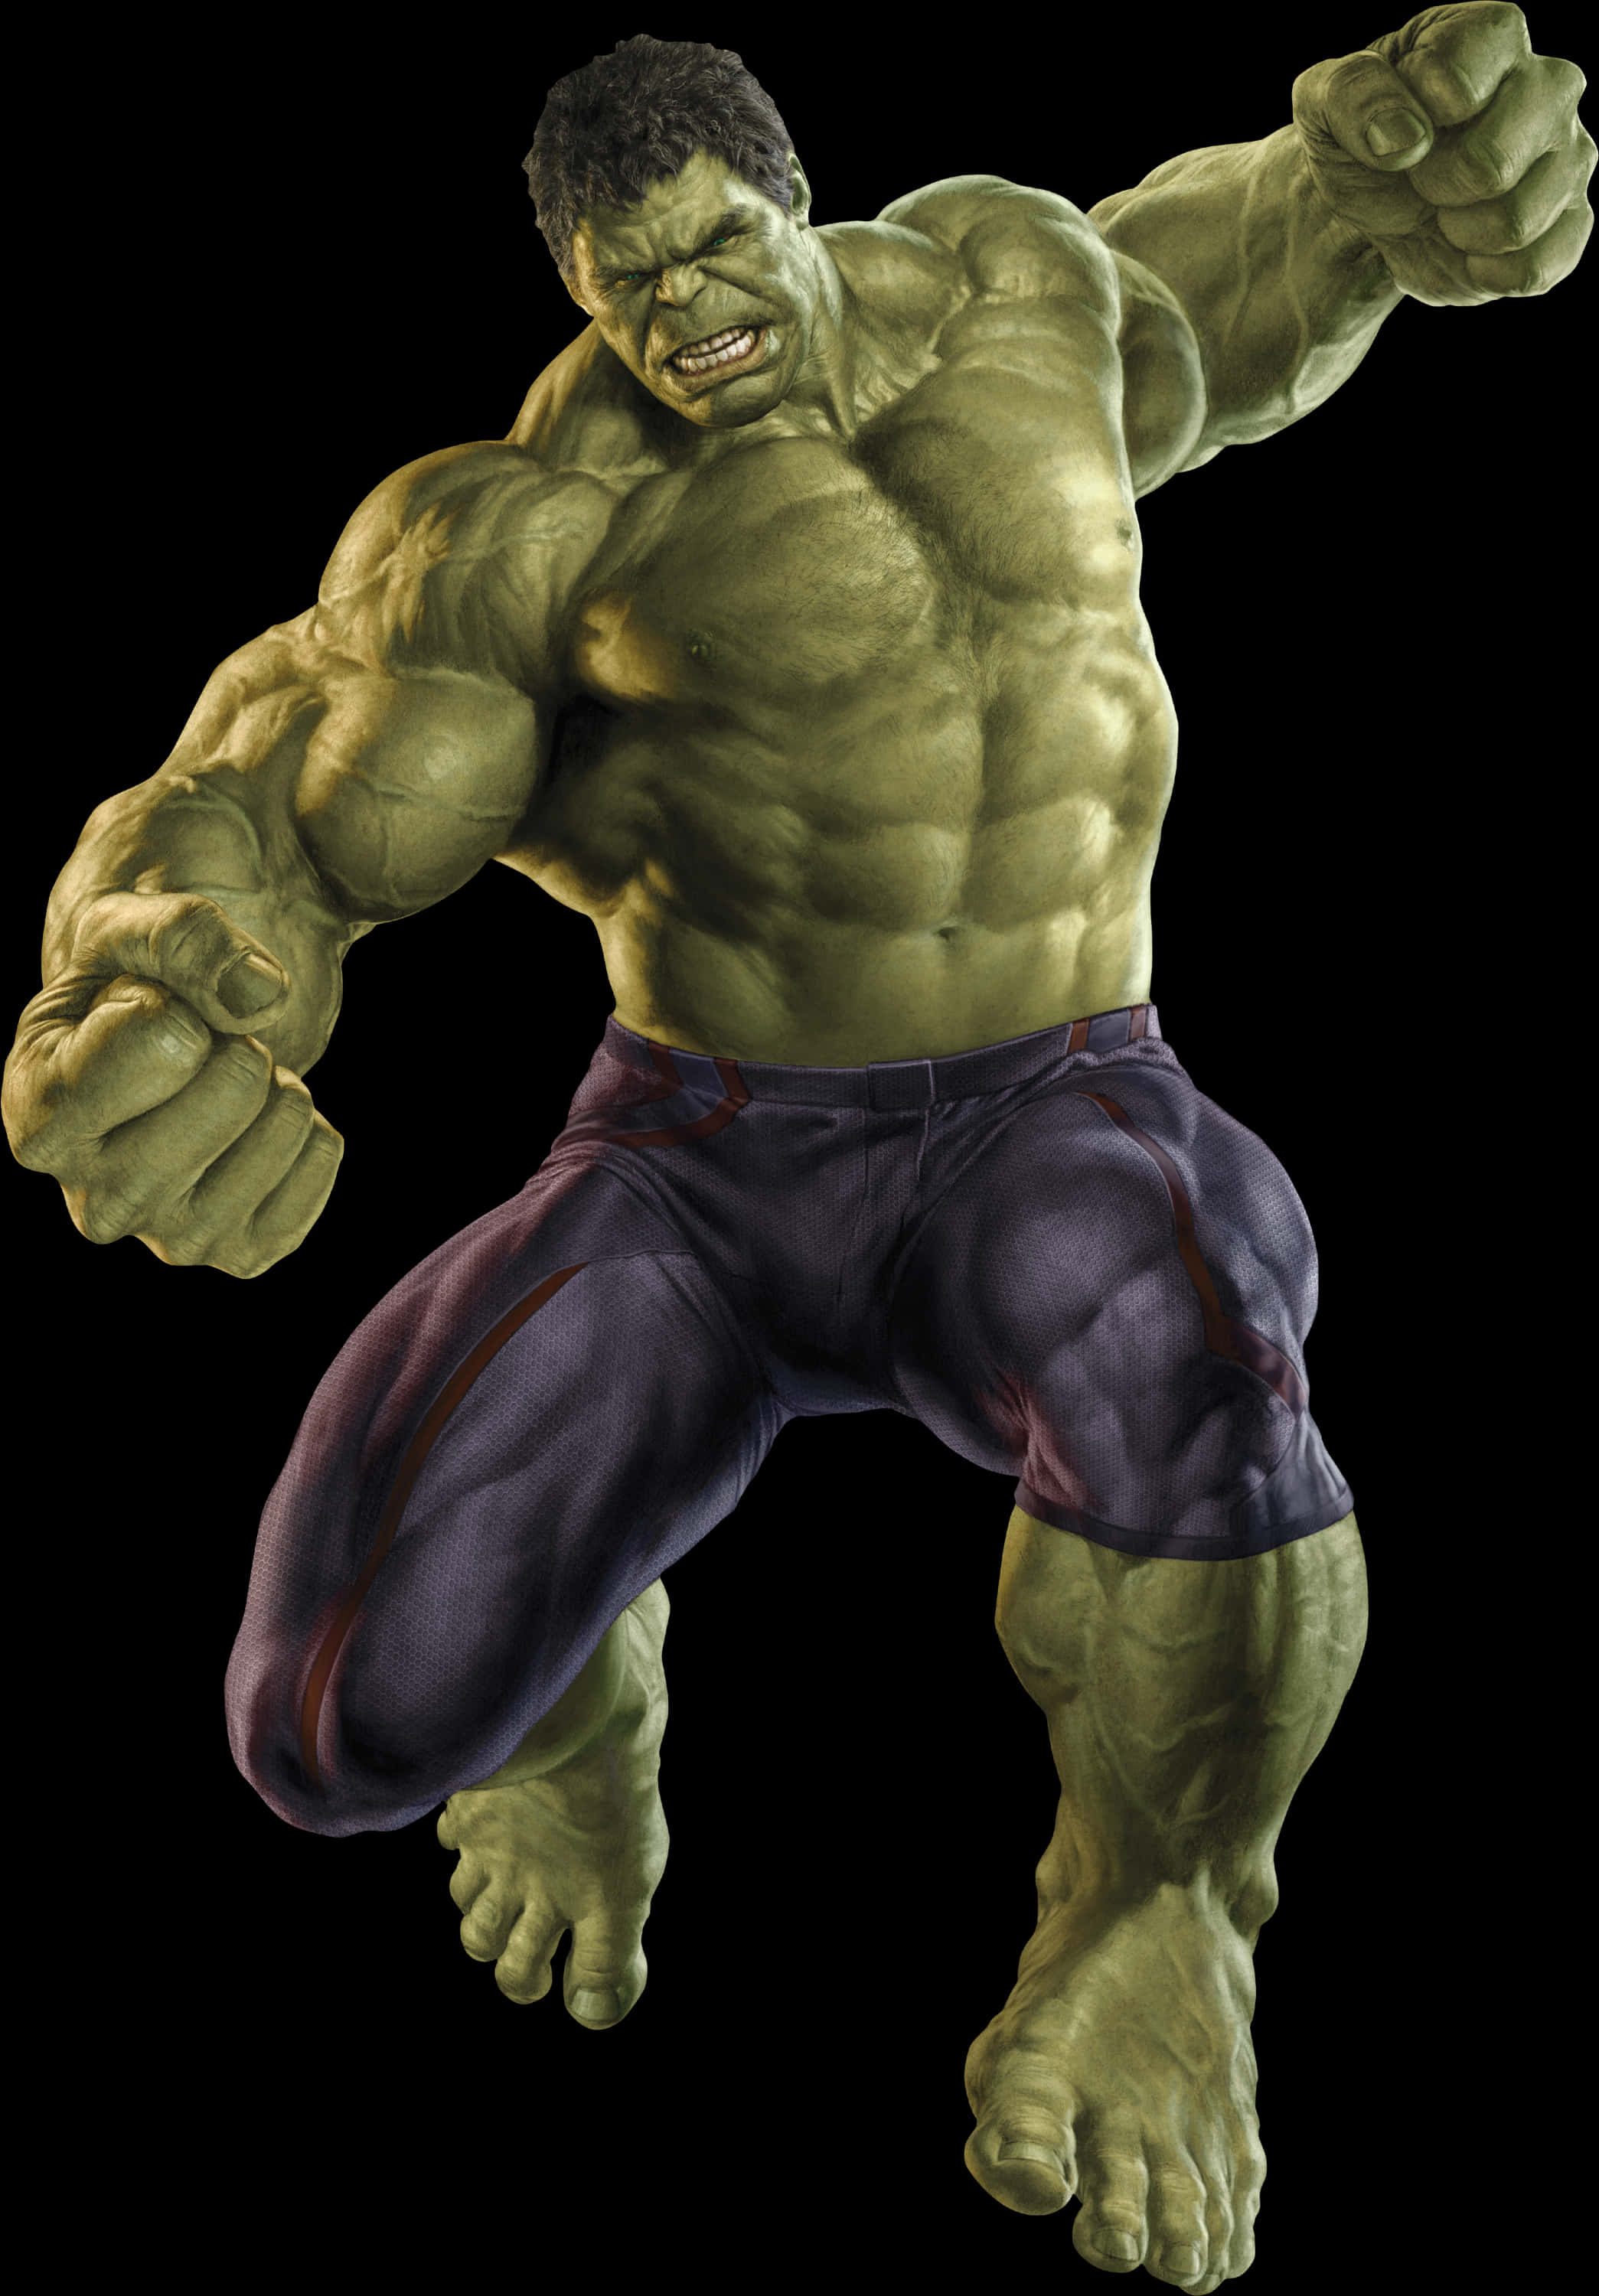 A Green Muscular Man With Black Pants